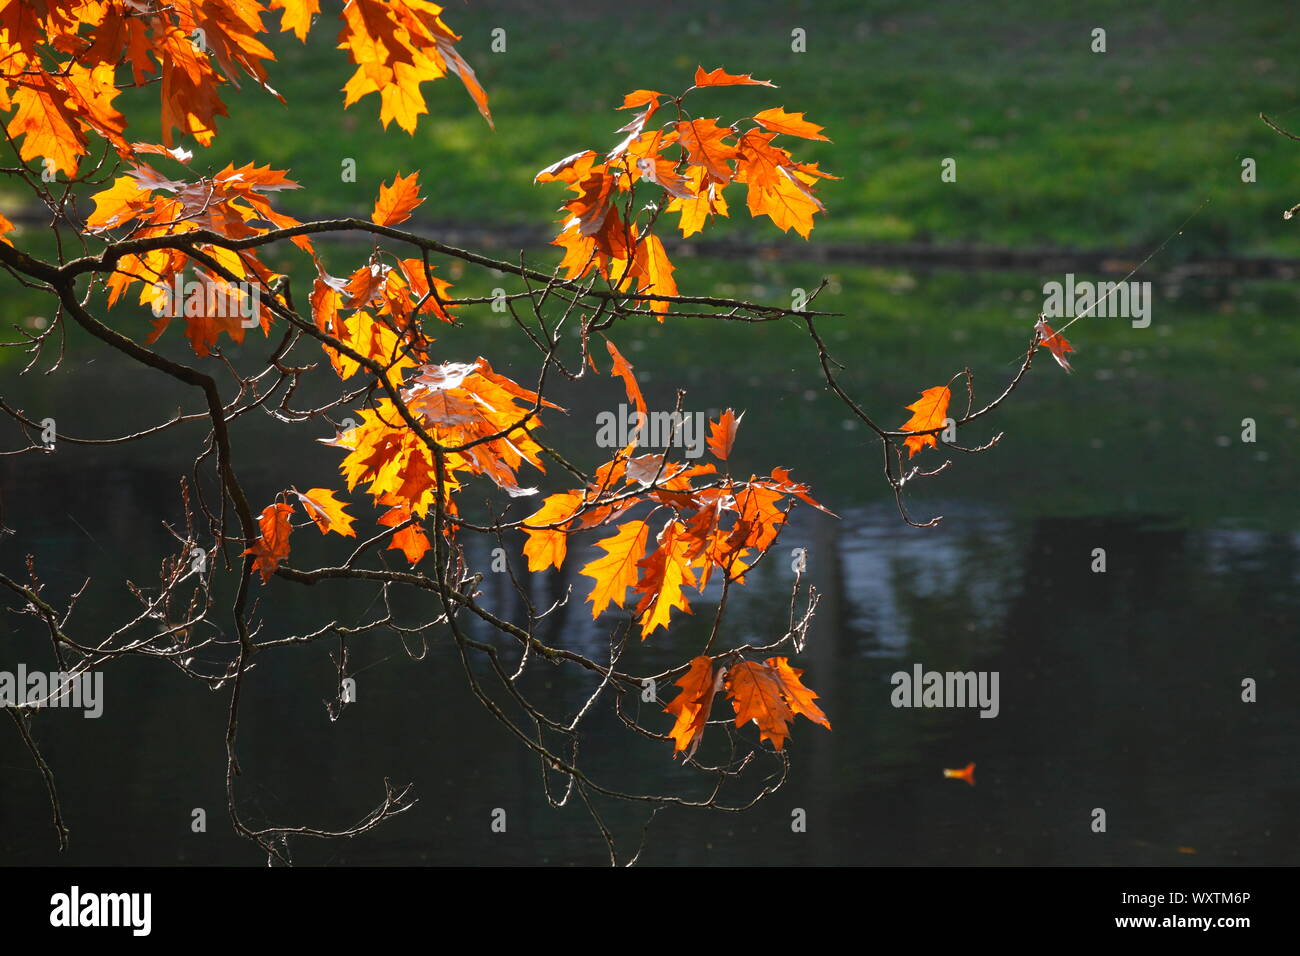 yellow discolored oak leaves on branches in backlight on a body of water, Germany, Europe Stock Photo